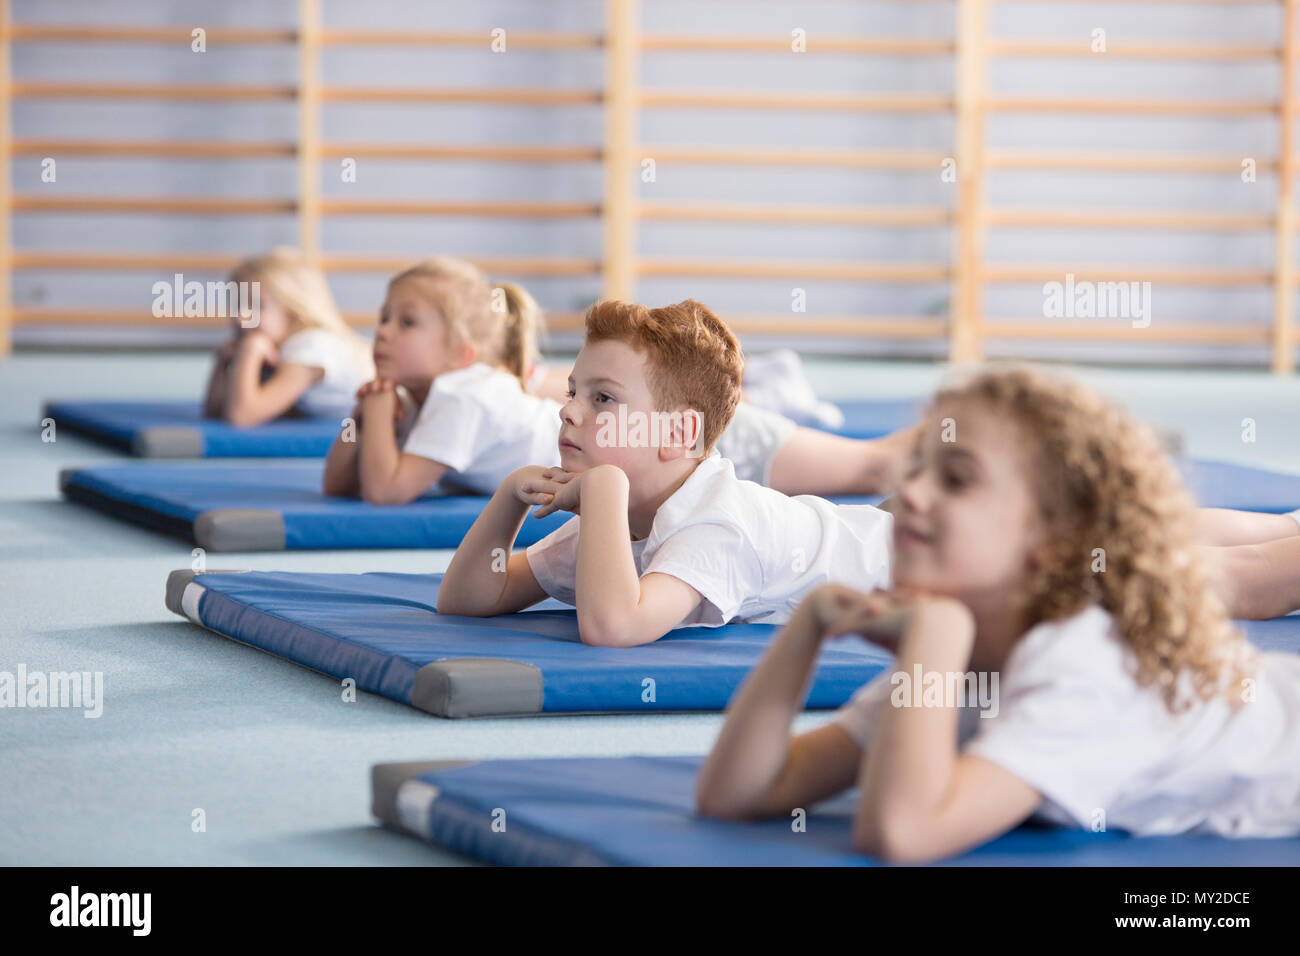 Boy relaxing on a blue mat with friends in a primary school Stock Photo